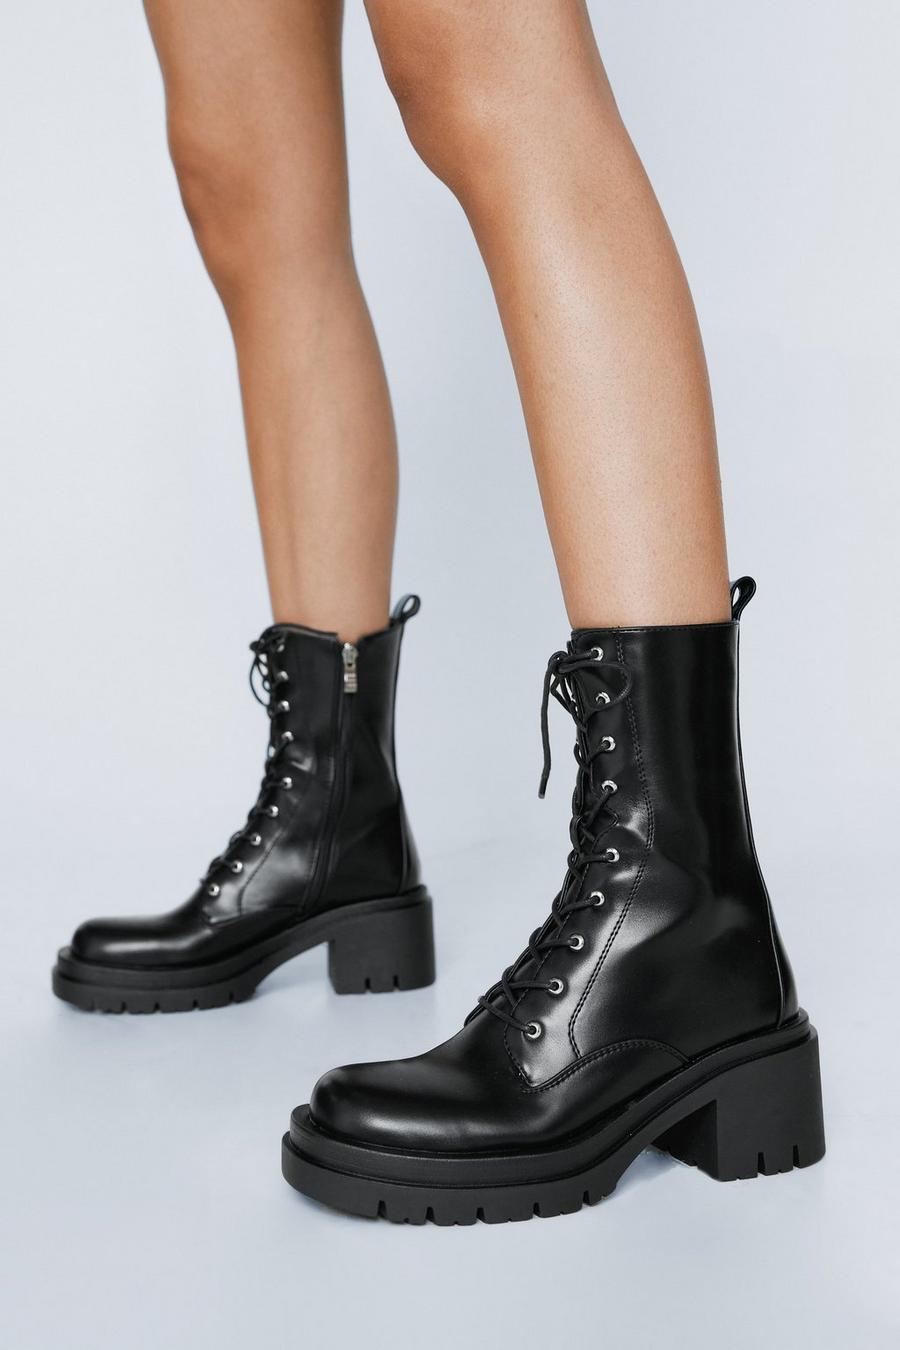 Sale Shoes & Boots | Cheap Shoes | Nasty Gal